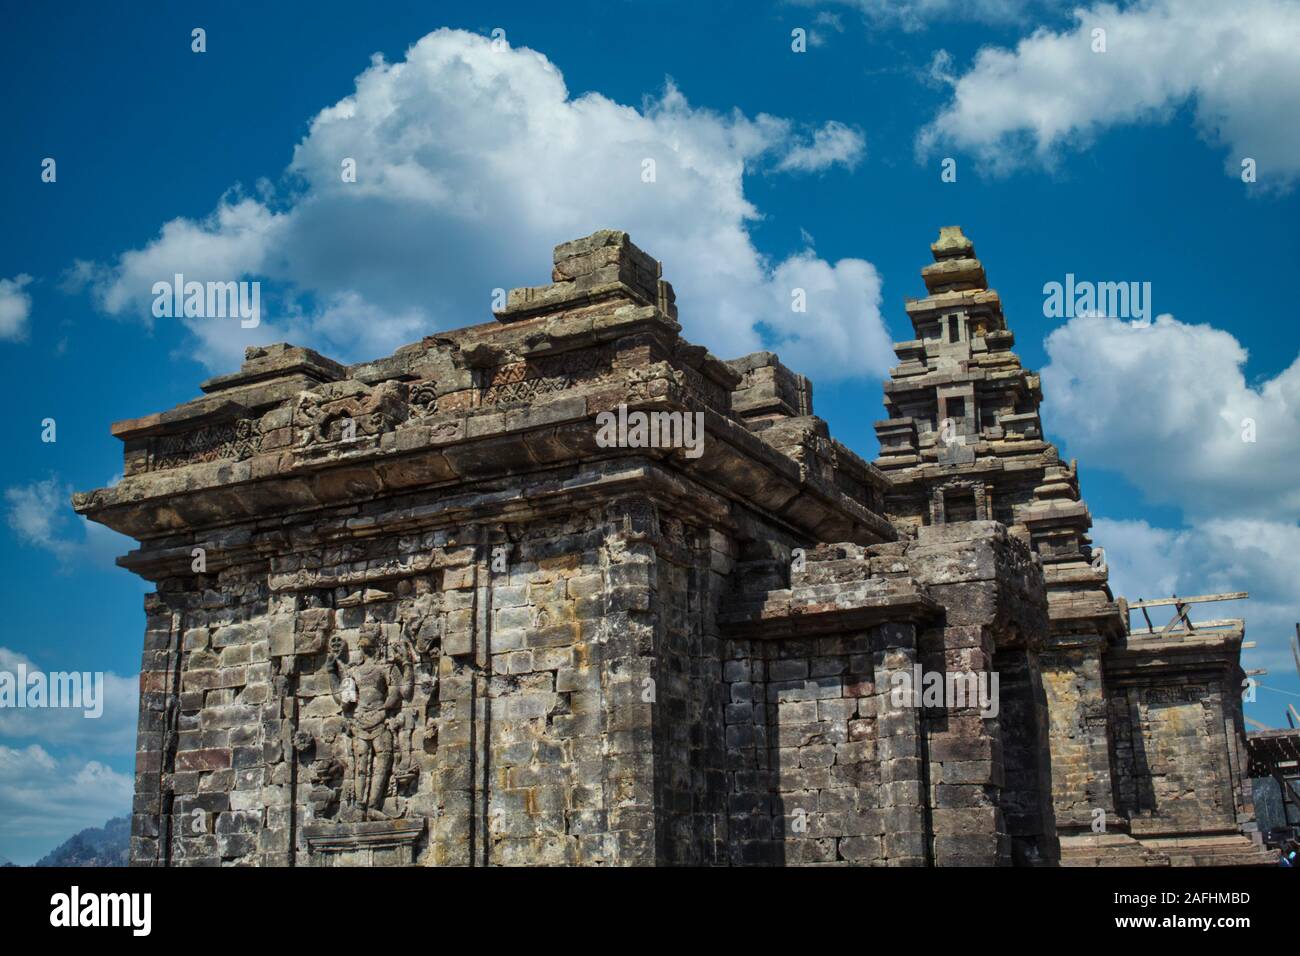 View of an ancient temple Candi Arjuna in touristic site of Dieng, Central Java, Indonesia Stock Photo